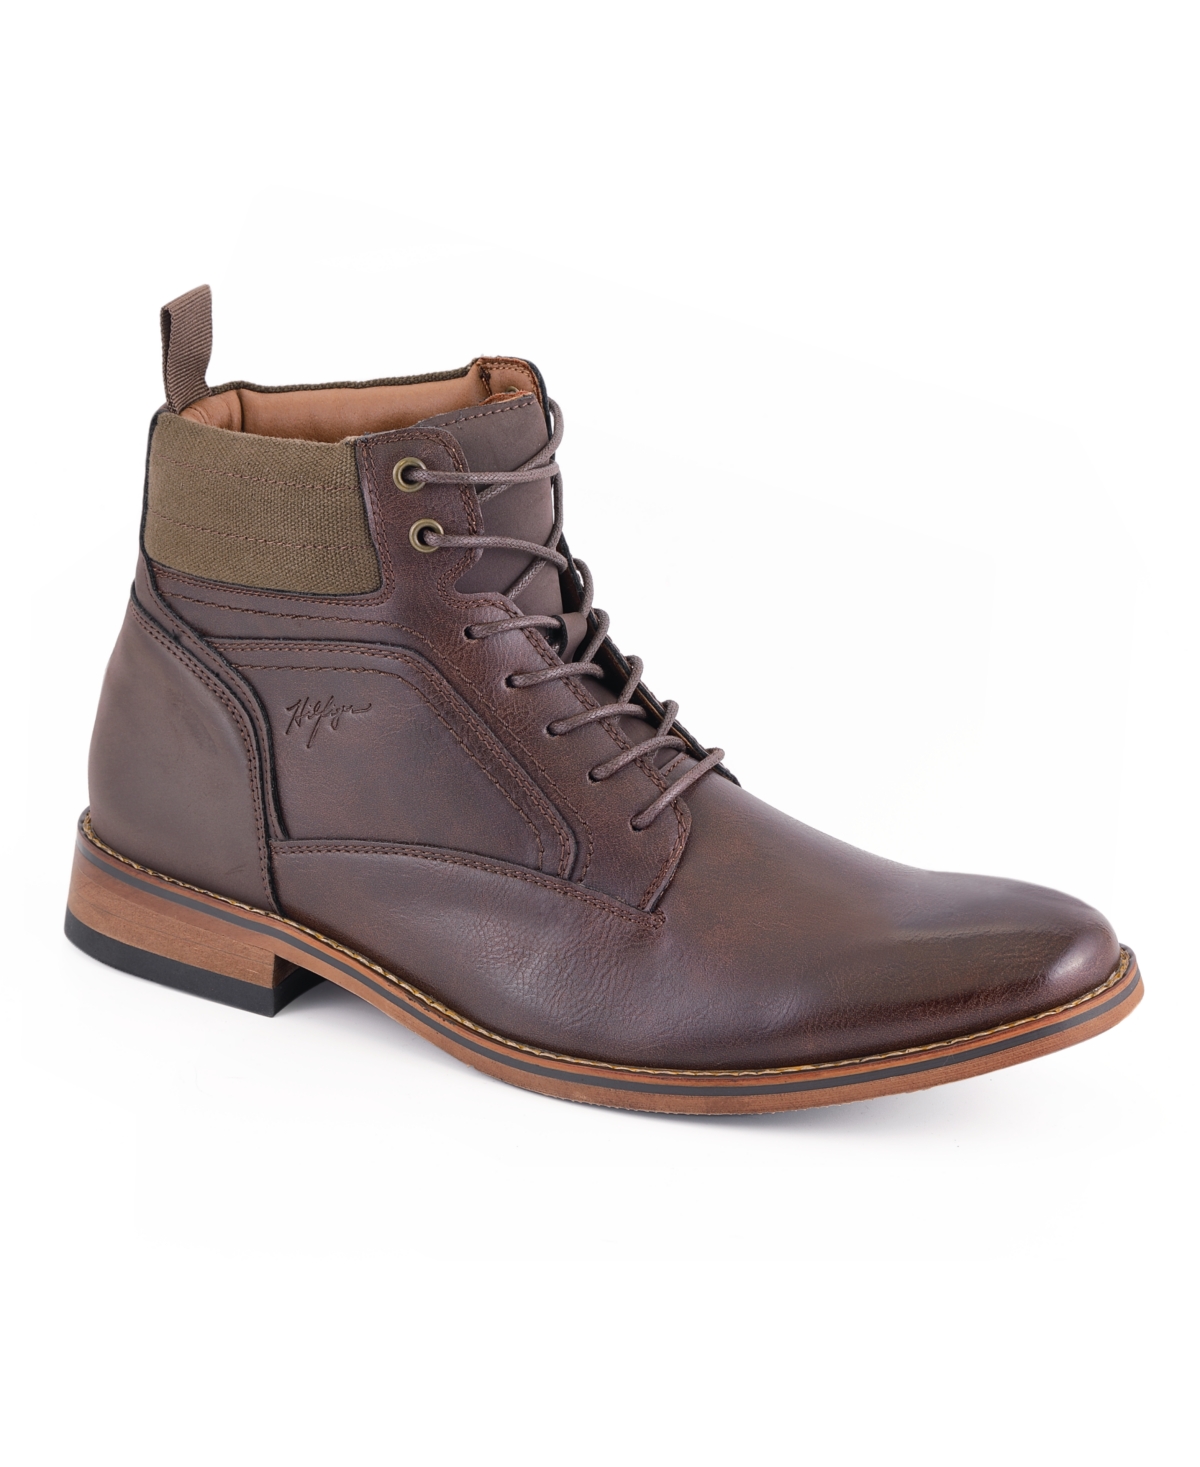 UPC 196496845789 product image for Tommy Hilfiger Men's Bowler Lace Up Casual Boots Men's Shoes | upcitemdb.com